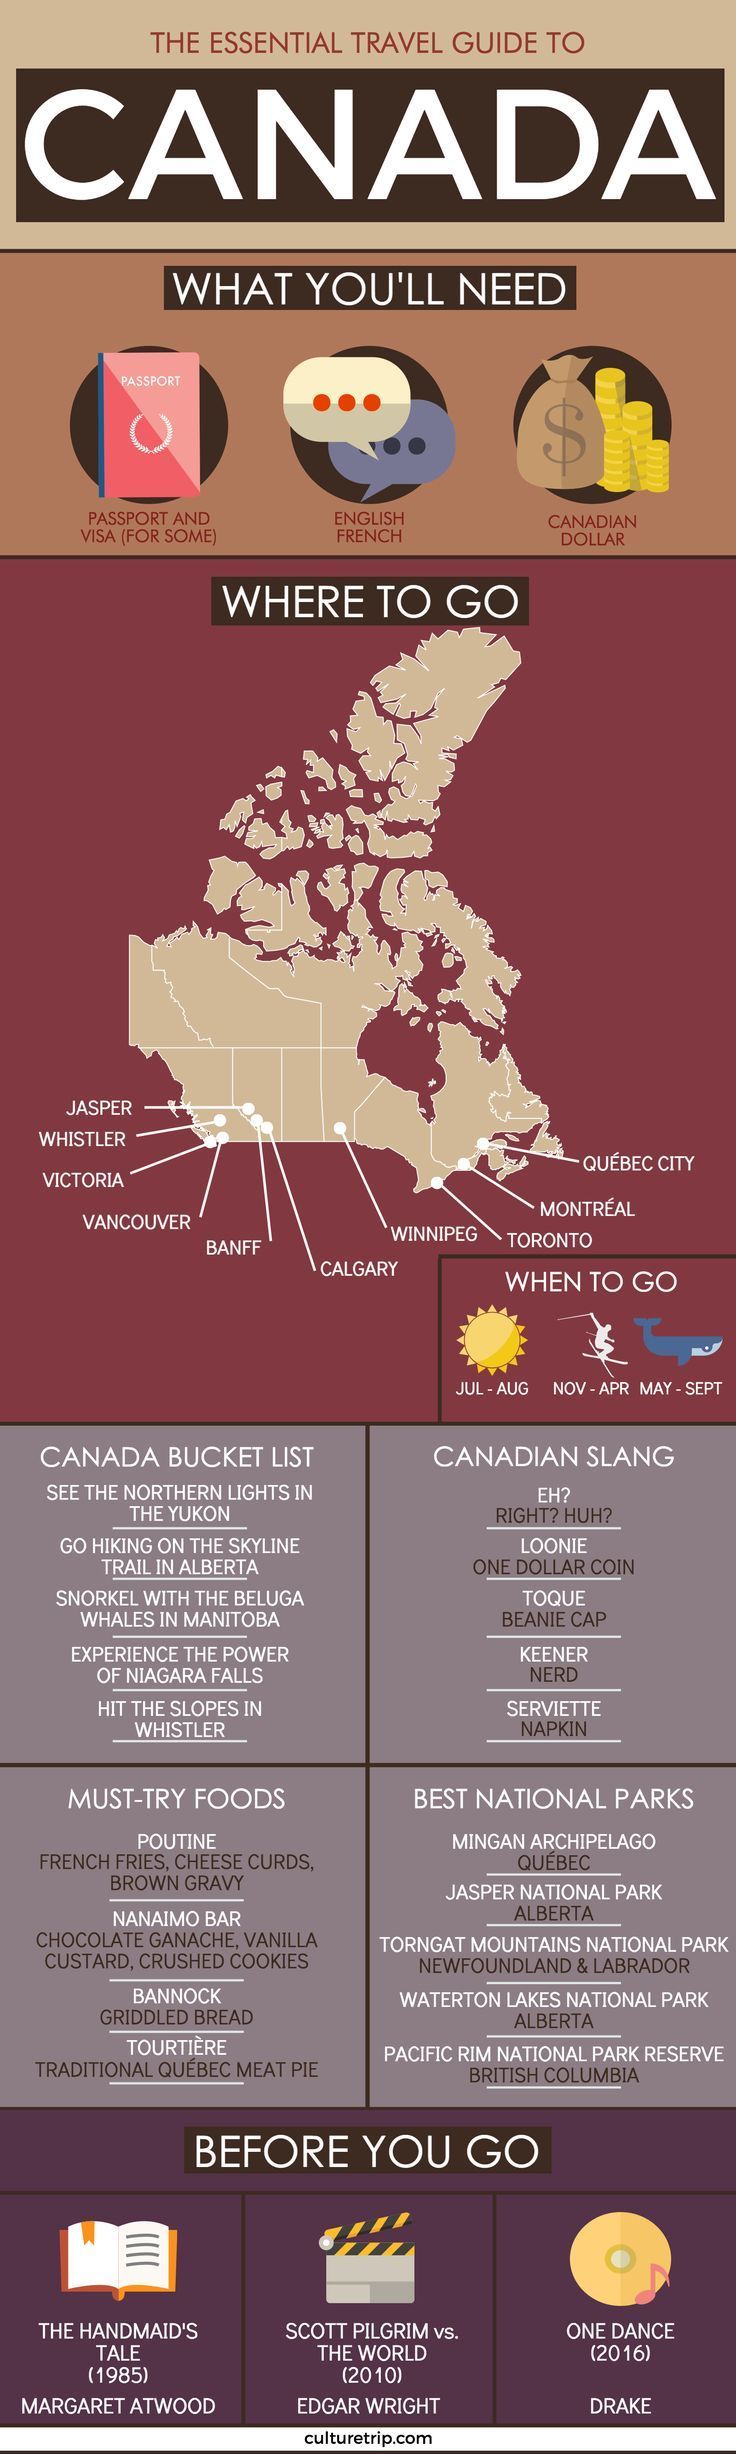 The Ultimate Travel Guide To Canada.